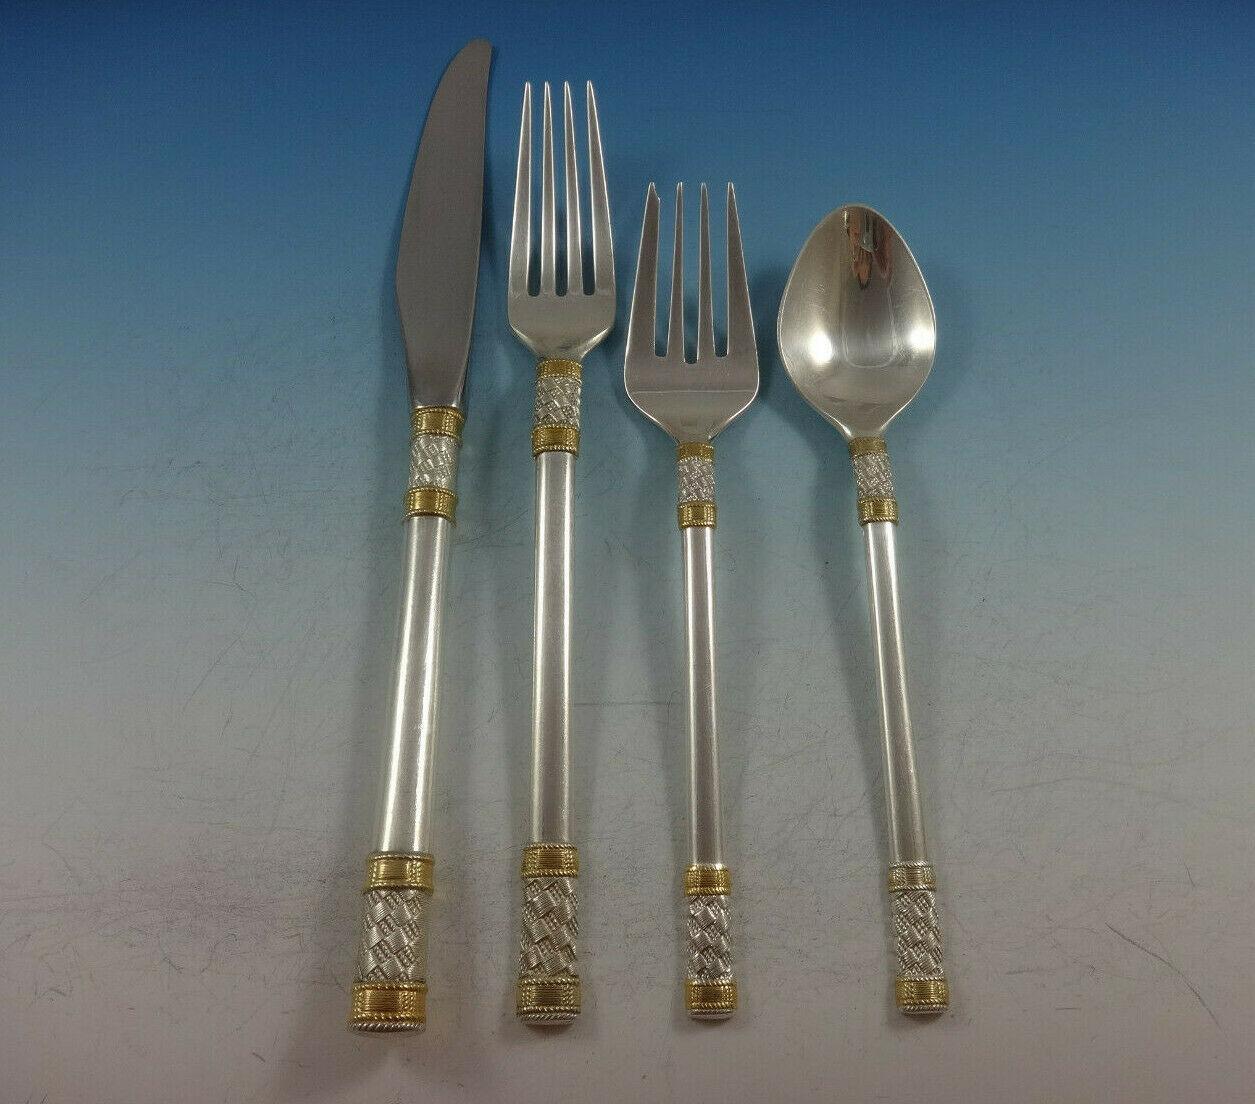 Aegean weave gold accent flatware by Wallace Silver. The birthplace of culture, the Aegean was the sea from which early Mediterranean societies drew their sustenance. The nets and baskets handwoven by fishermen centuries ago are still in use along